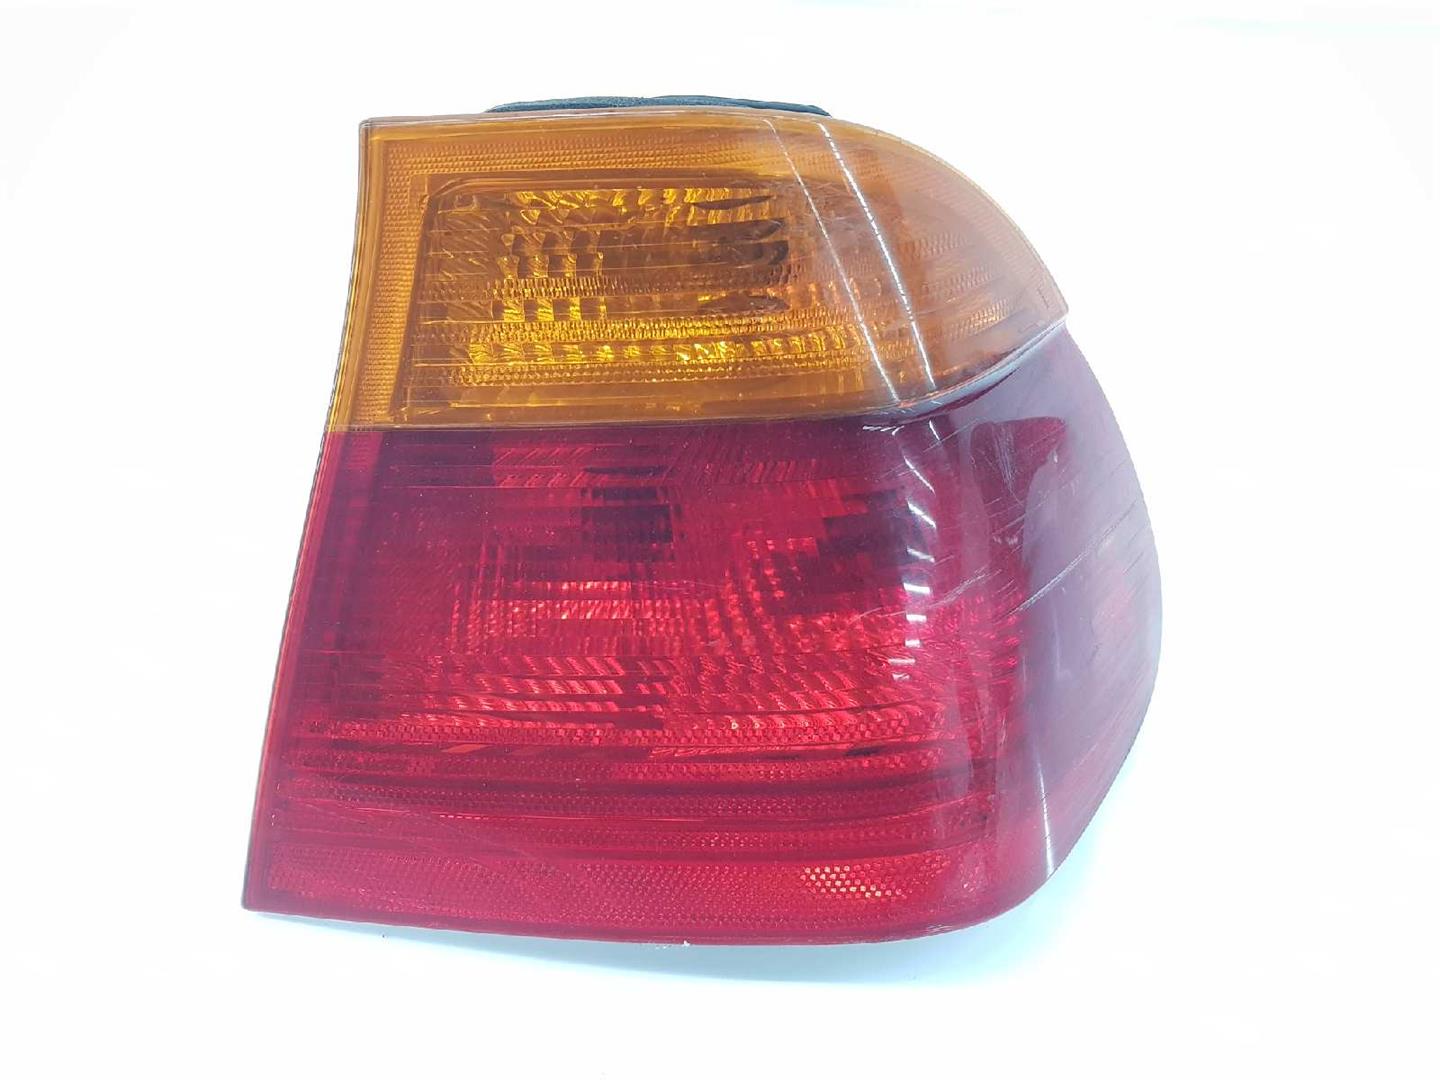 BMW 3 Series E46 (1997-2006) Rear Right Taillight Lamp 63218364922, 8364922, 230012 19915394